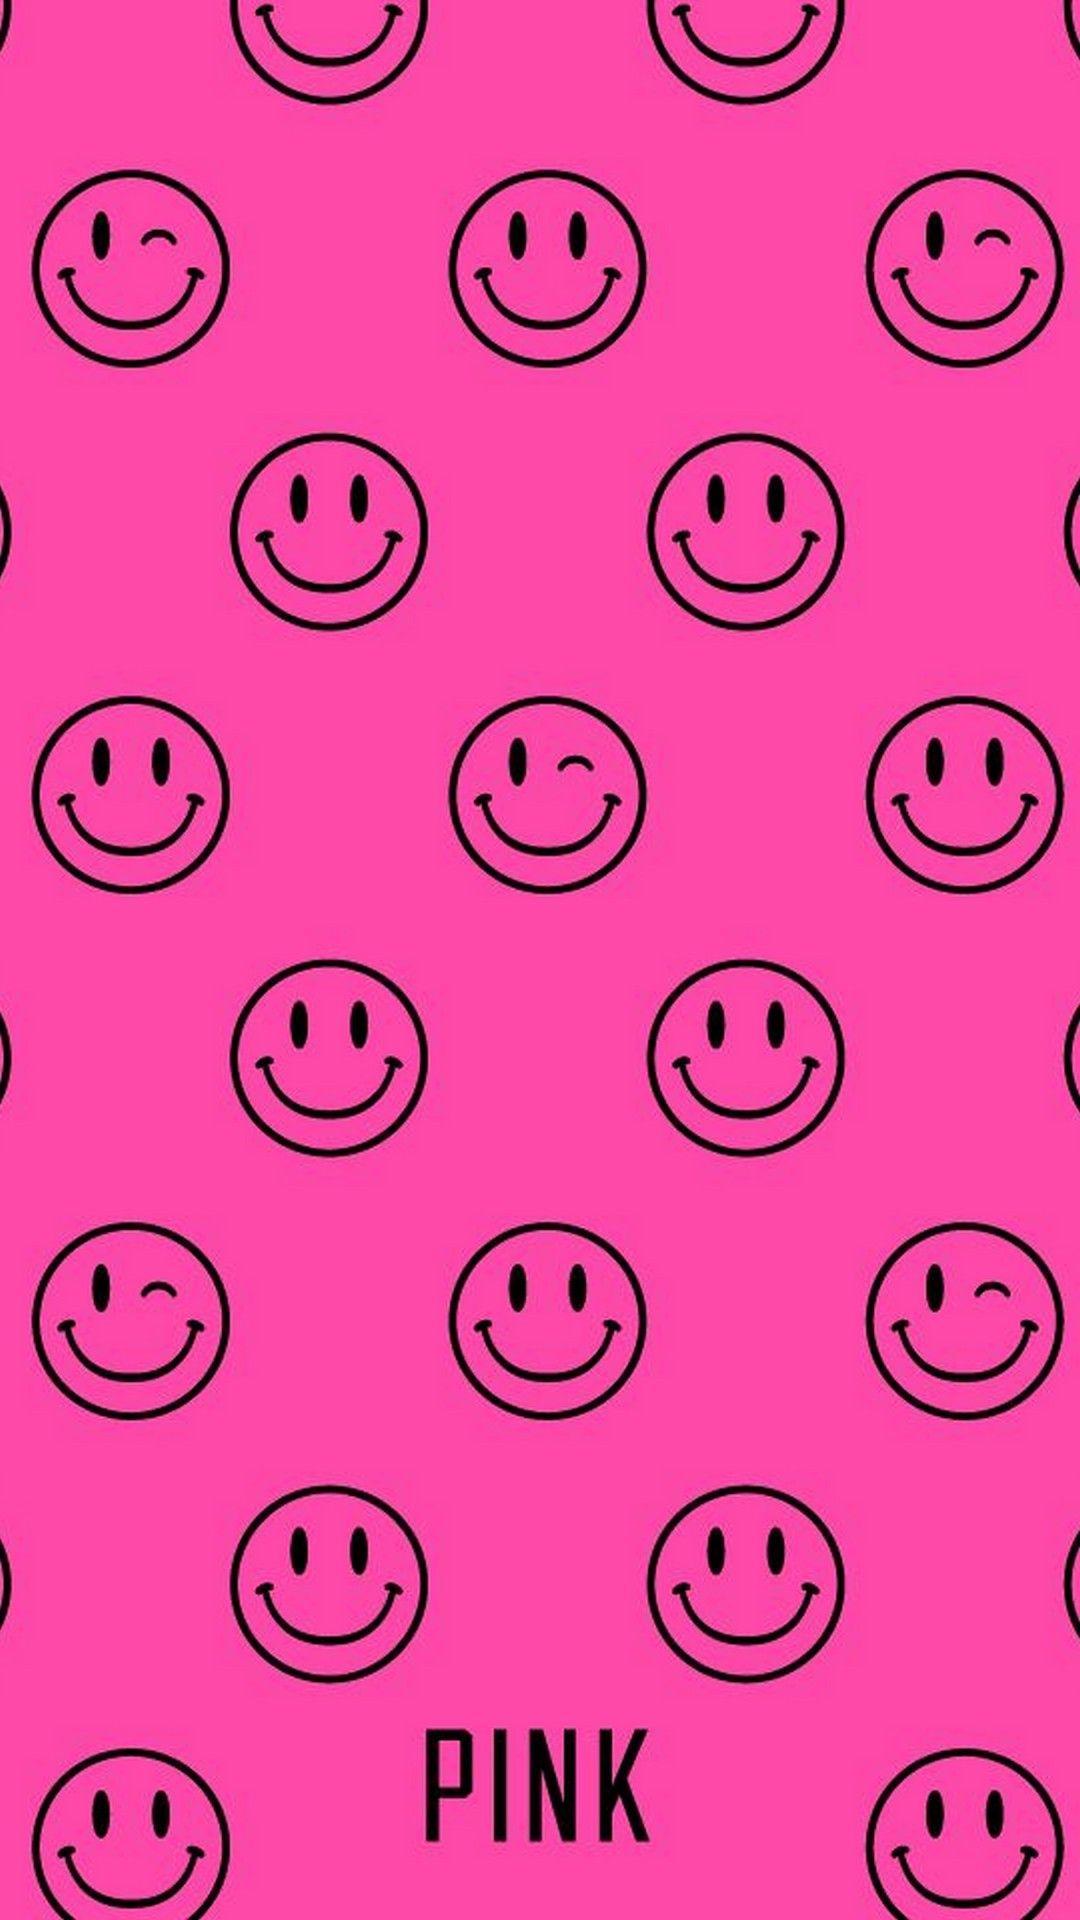 100+ pink cute emojis Download free pink cute emojis for your messages